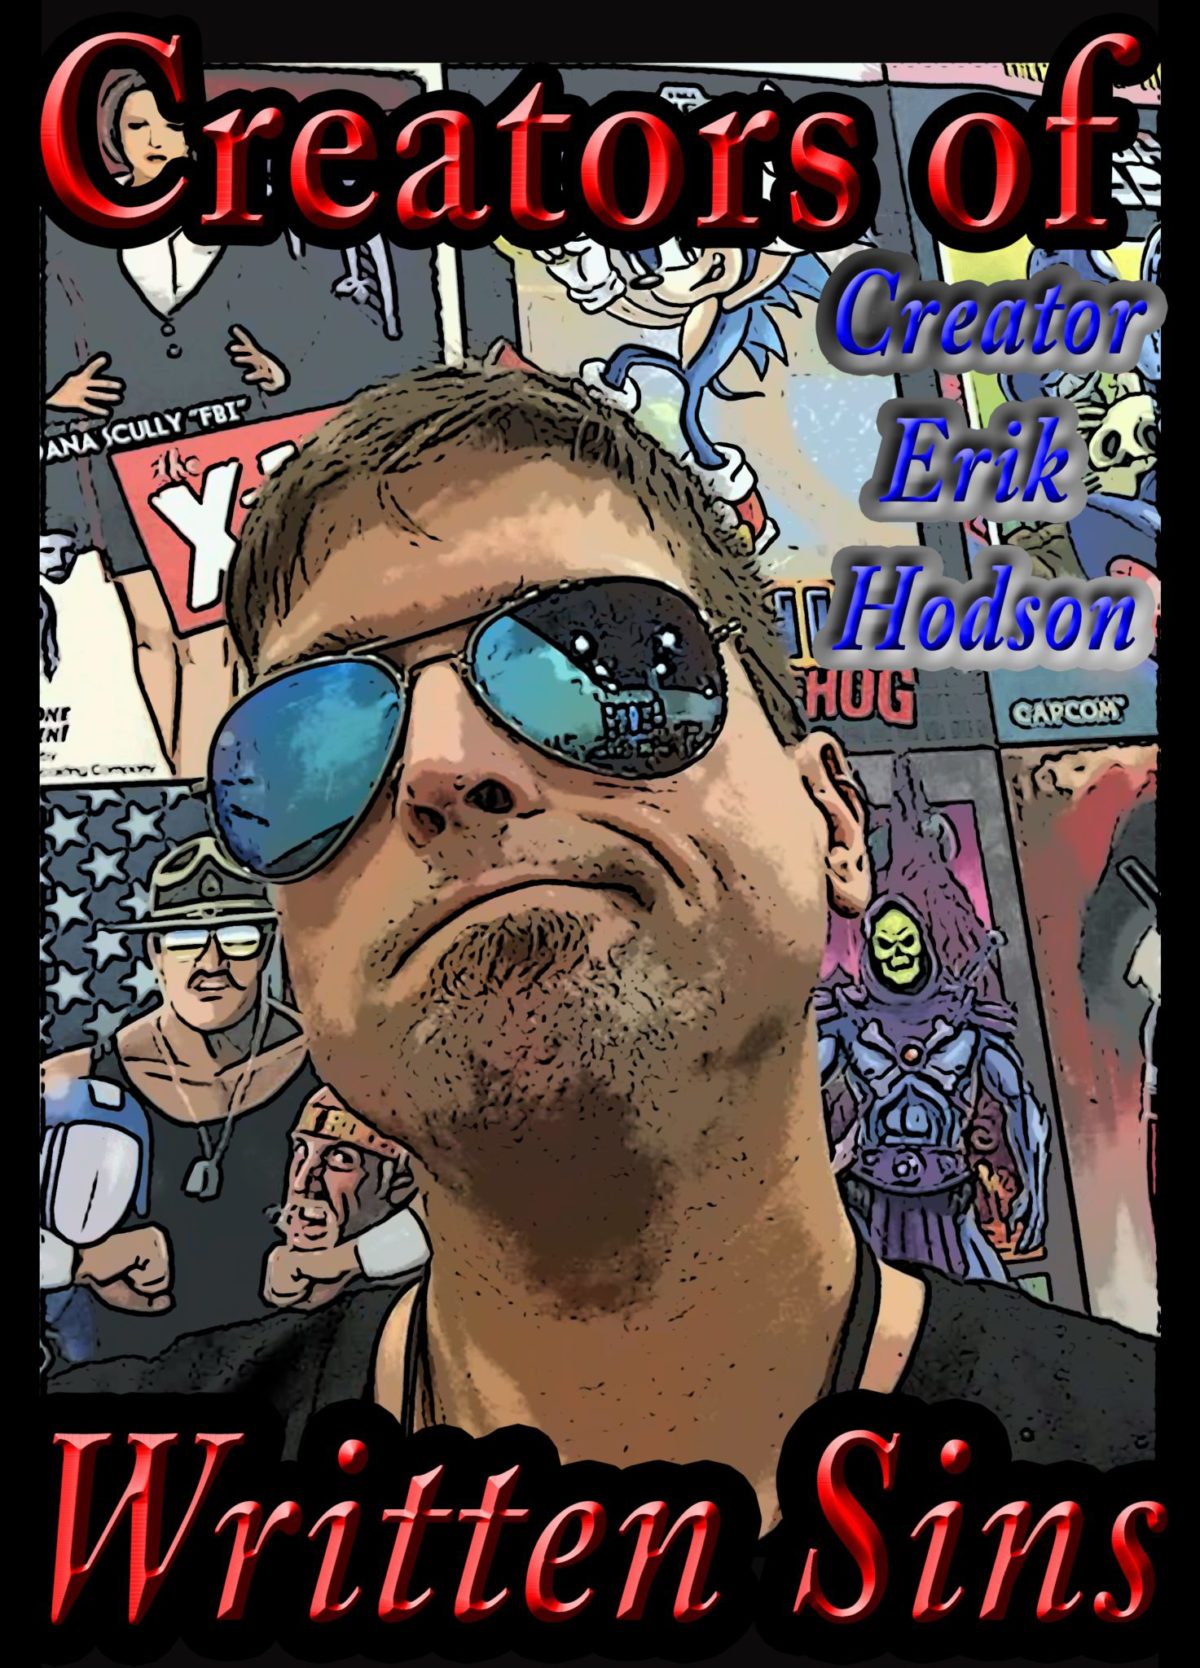 Erik Hodson Gives us a Look at WIZARD WORLD ARTIST ALLEY